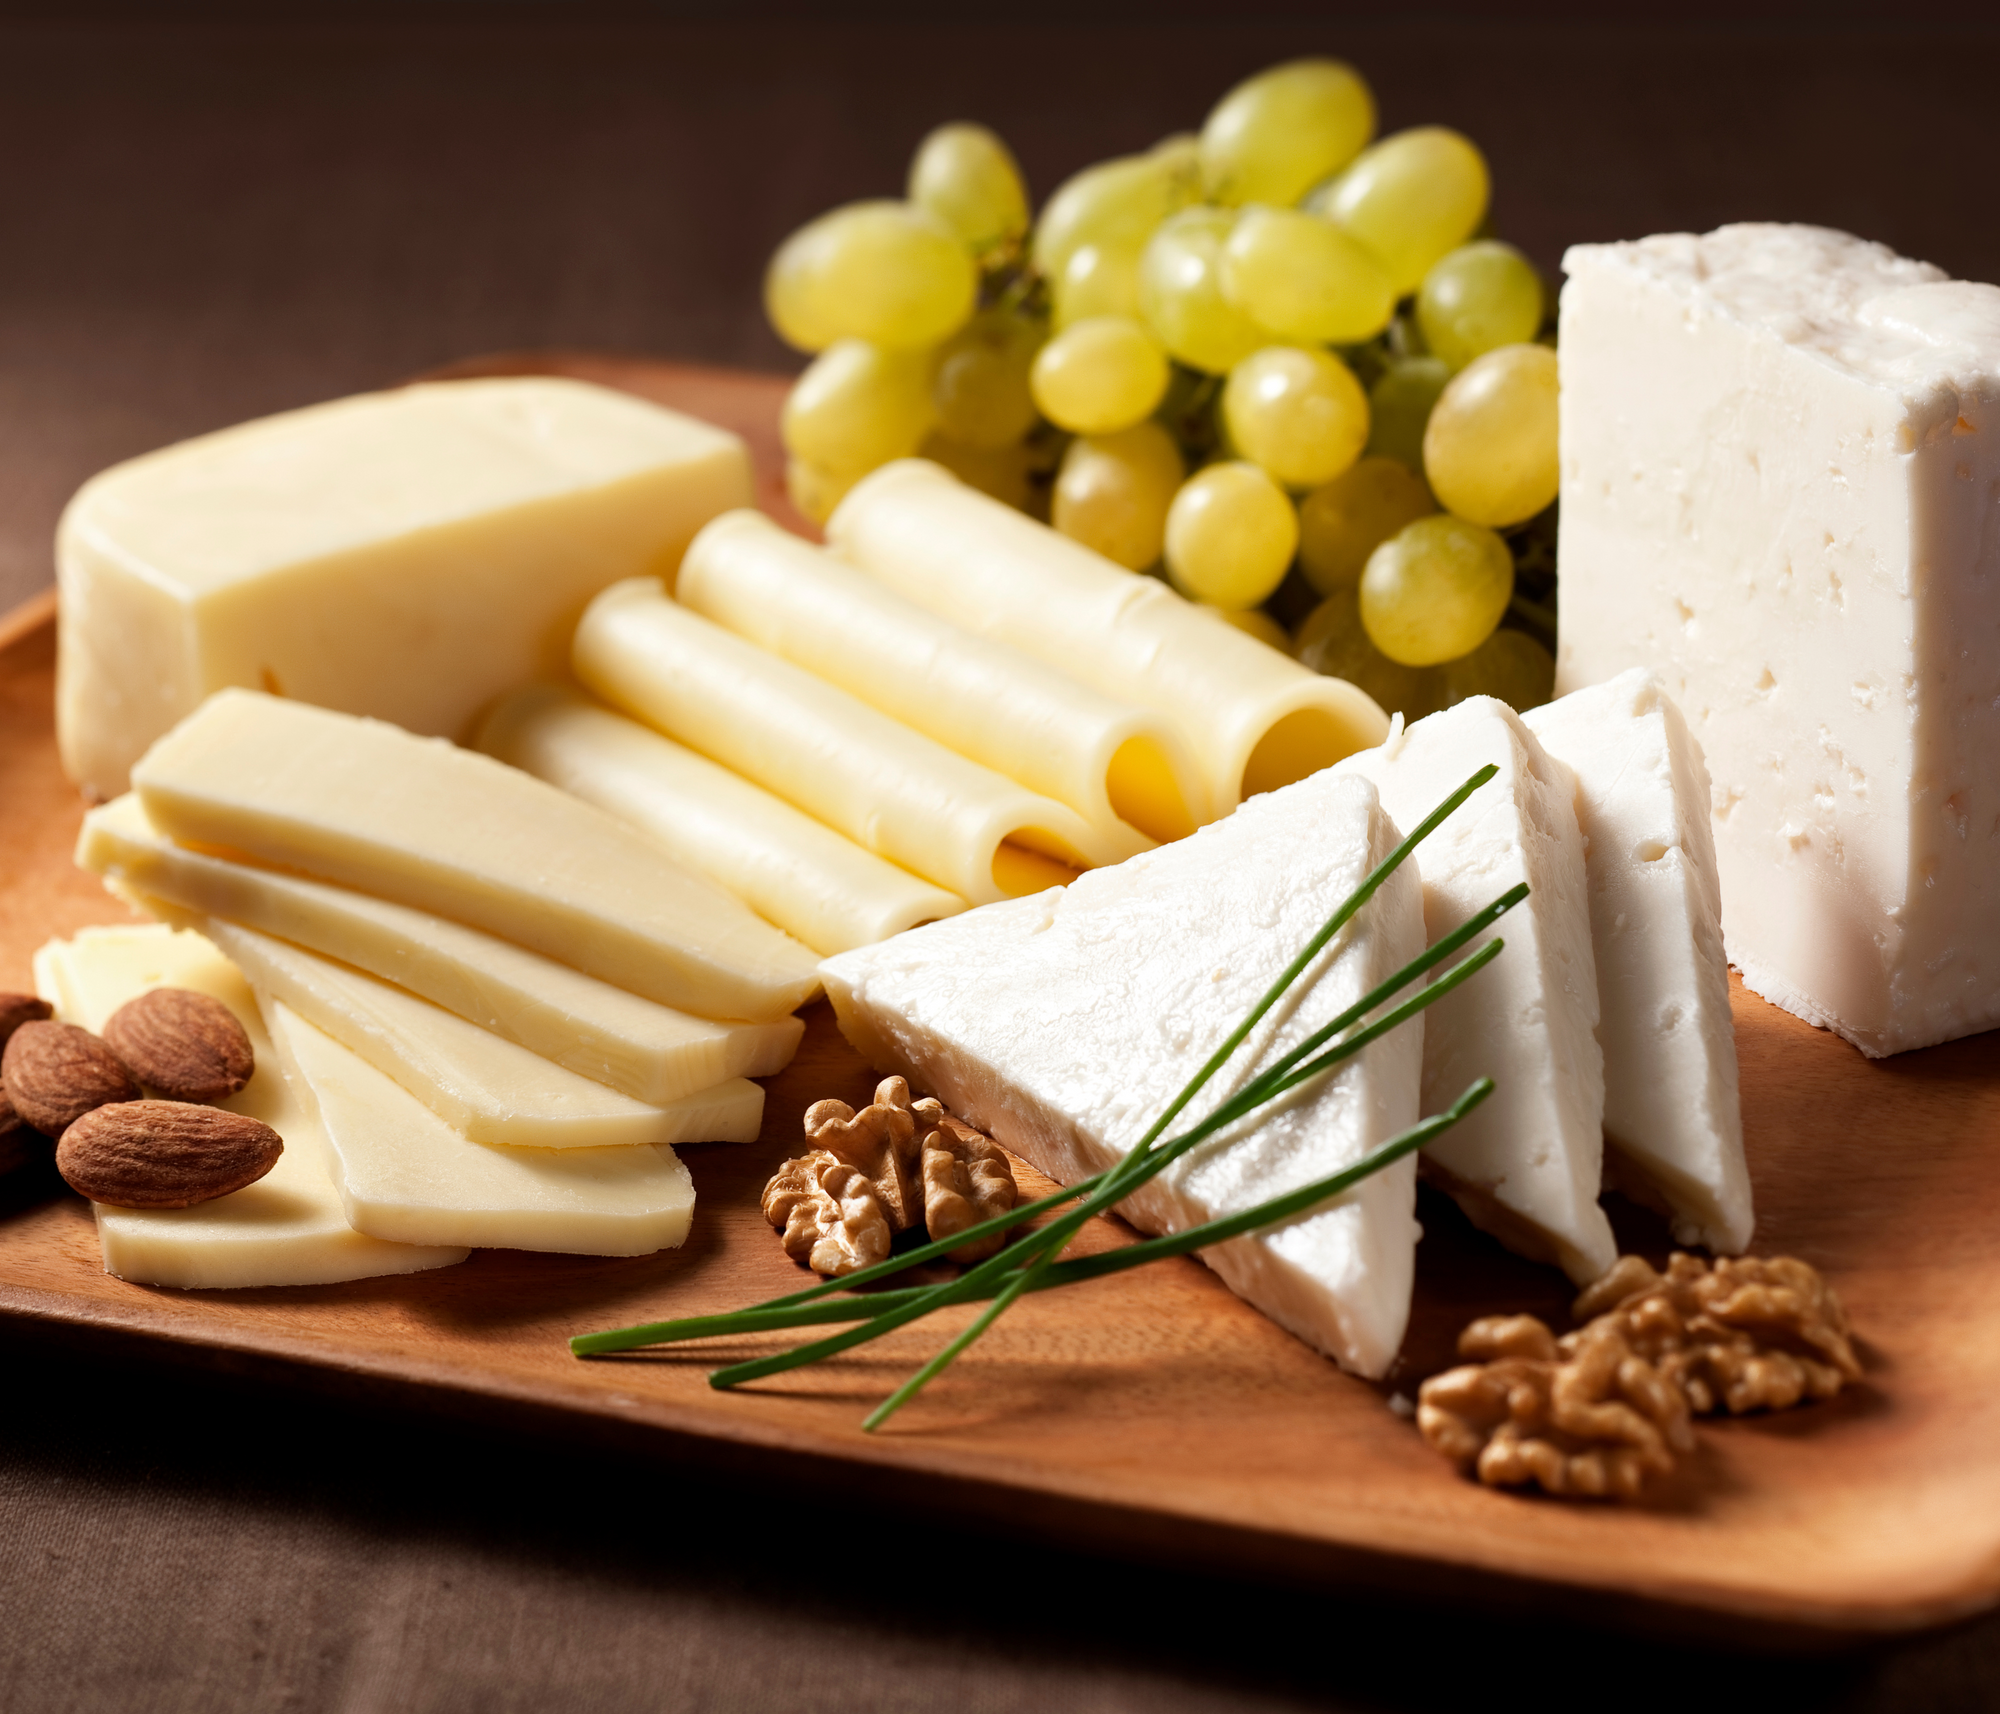 various types of cheeses